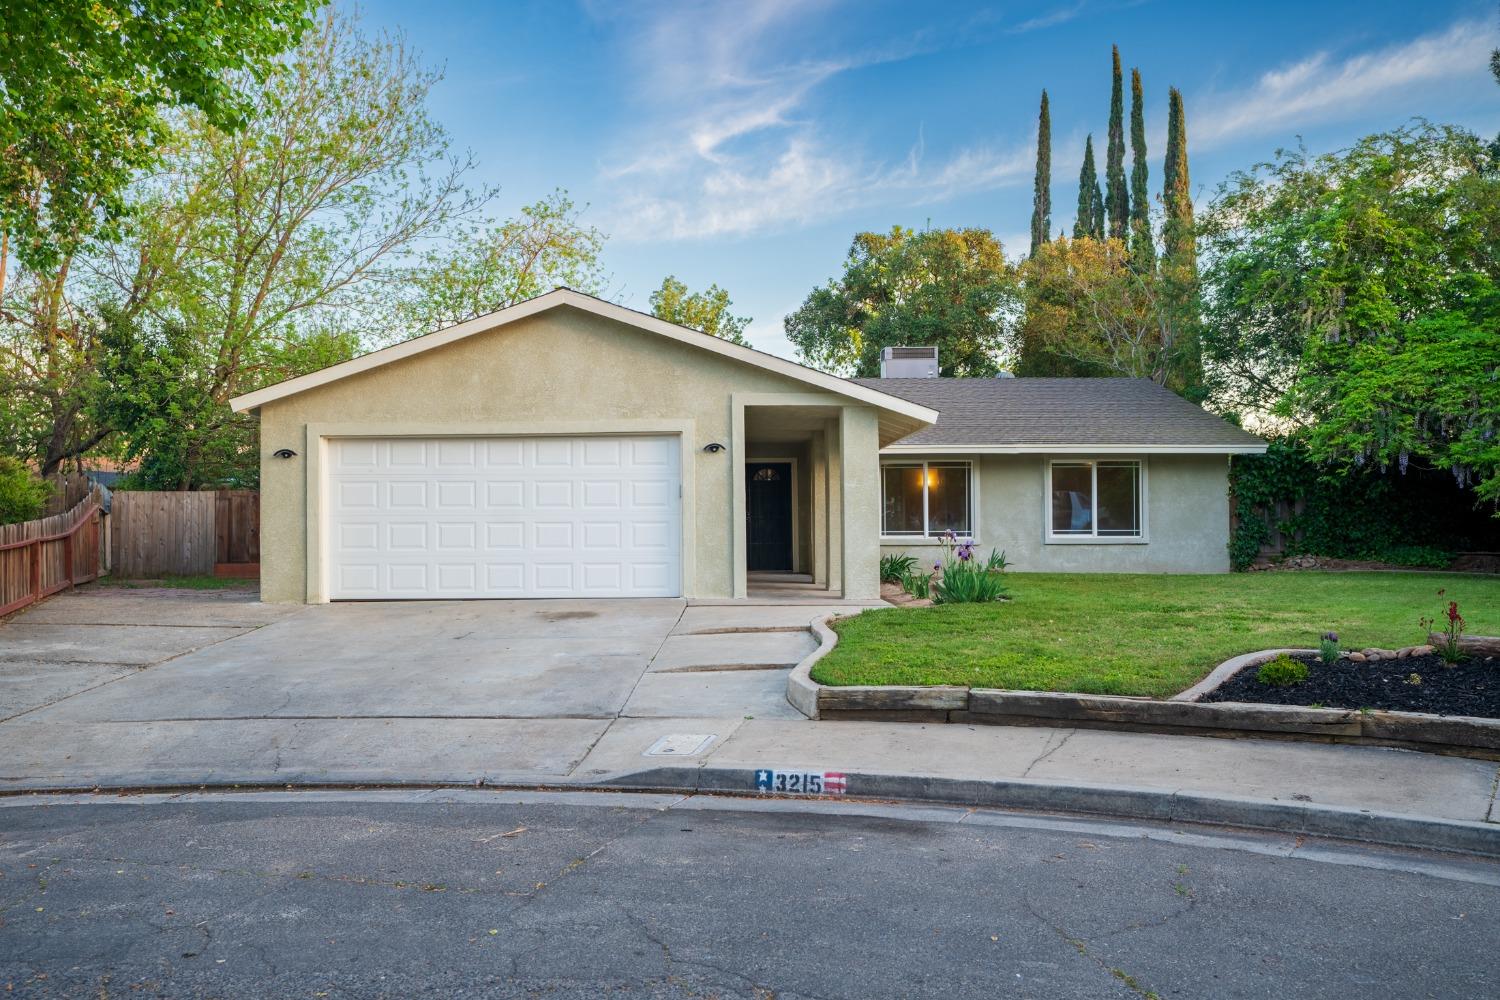 Move in ready North Merced home. Large end of cul-de-sac lot! Home features 3 spacious bedrooms, 2 b